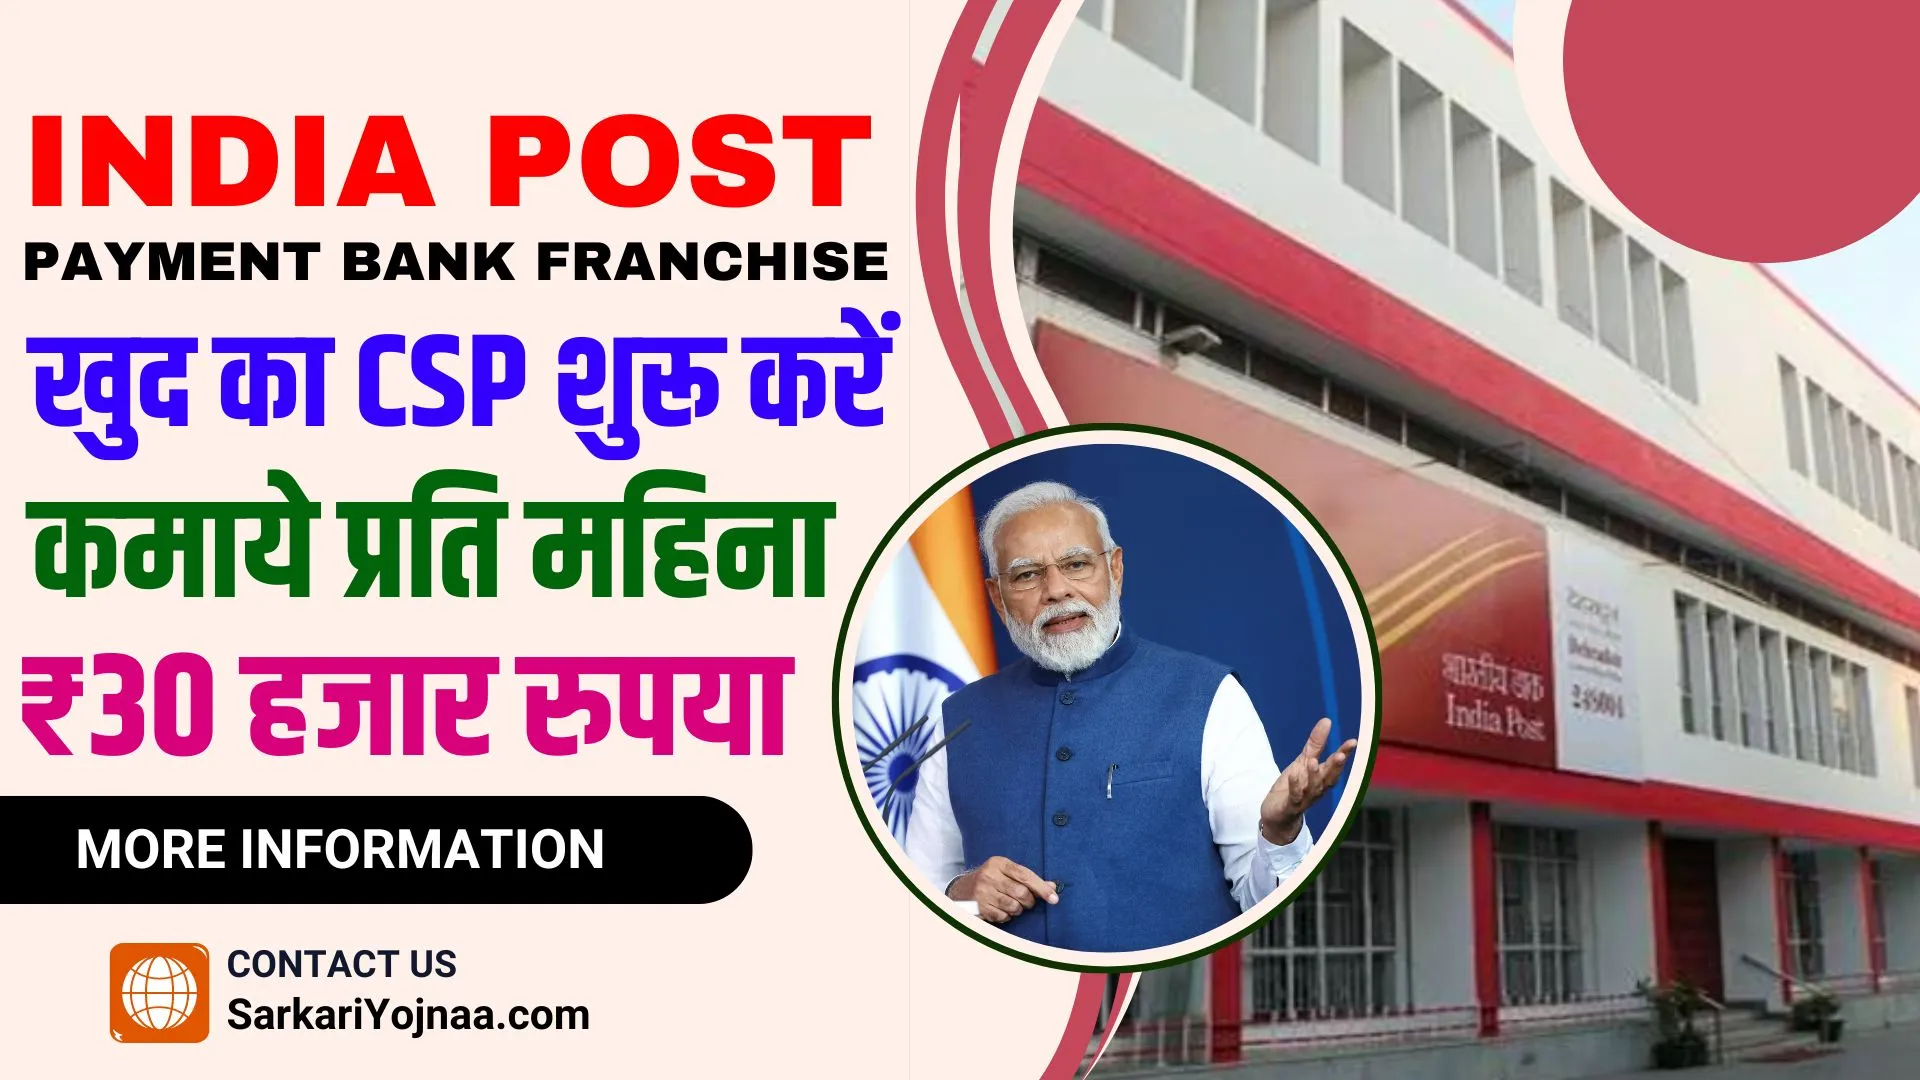 India Post Payment Bank Franchise